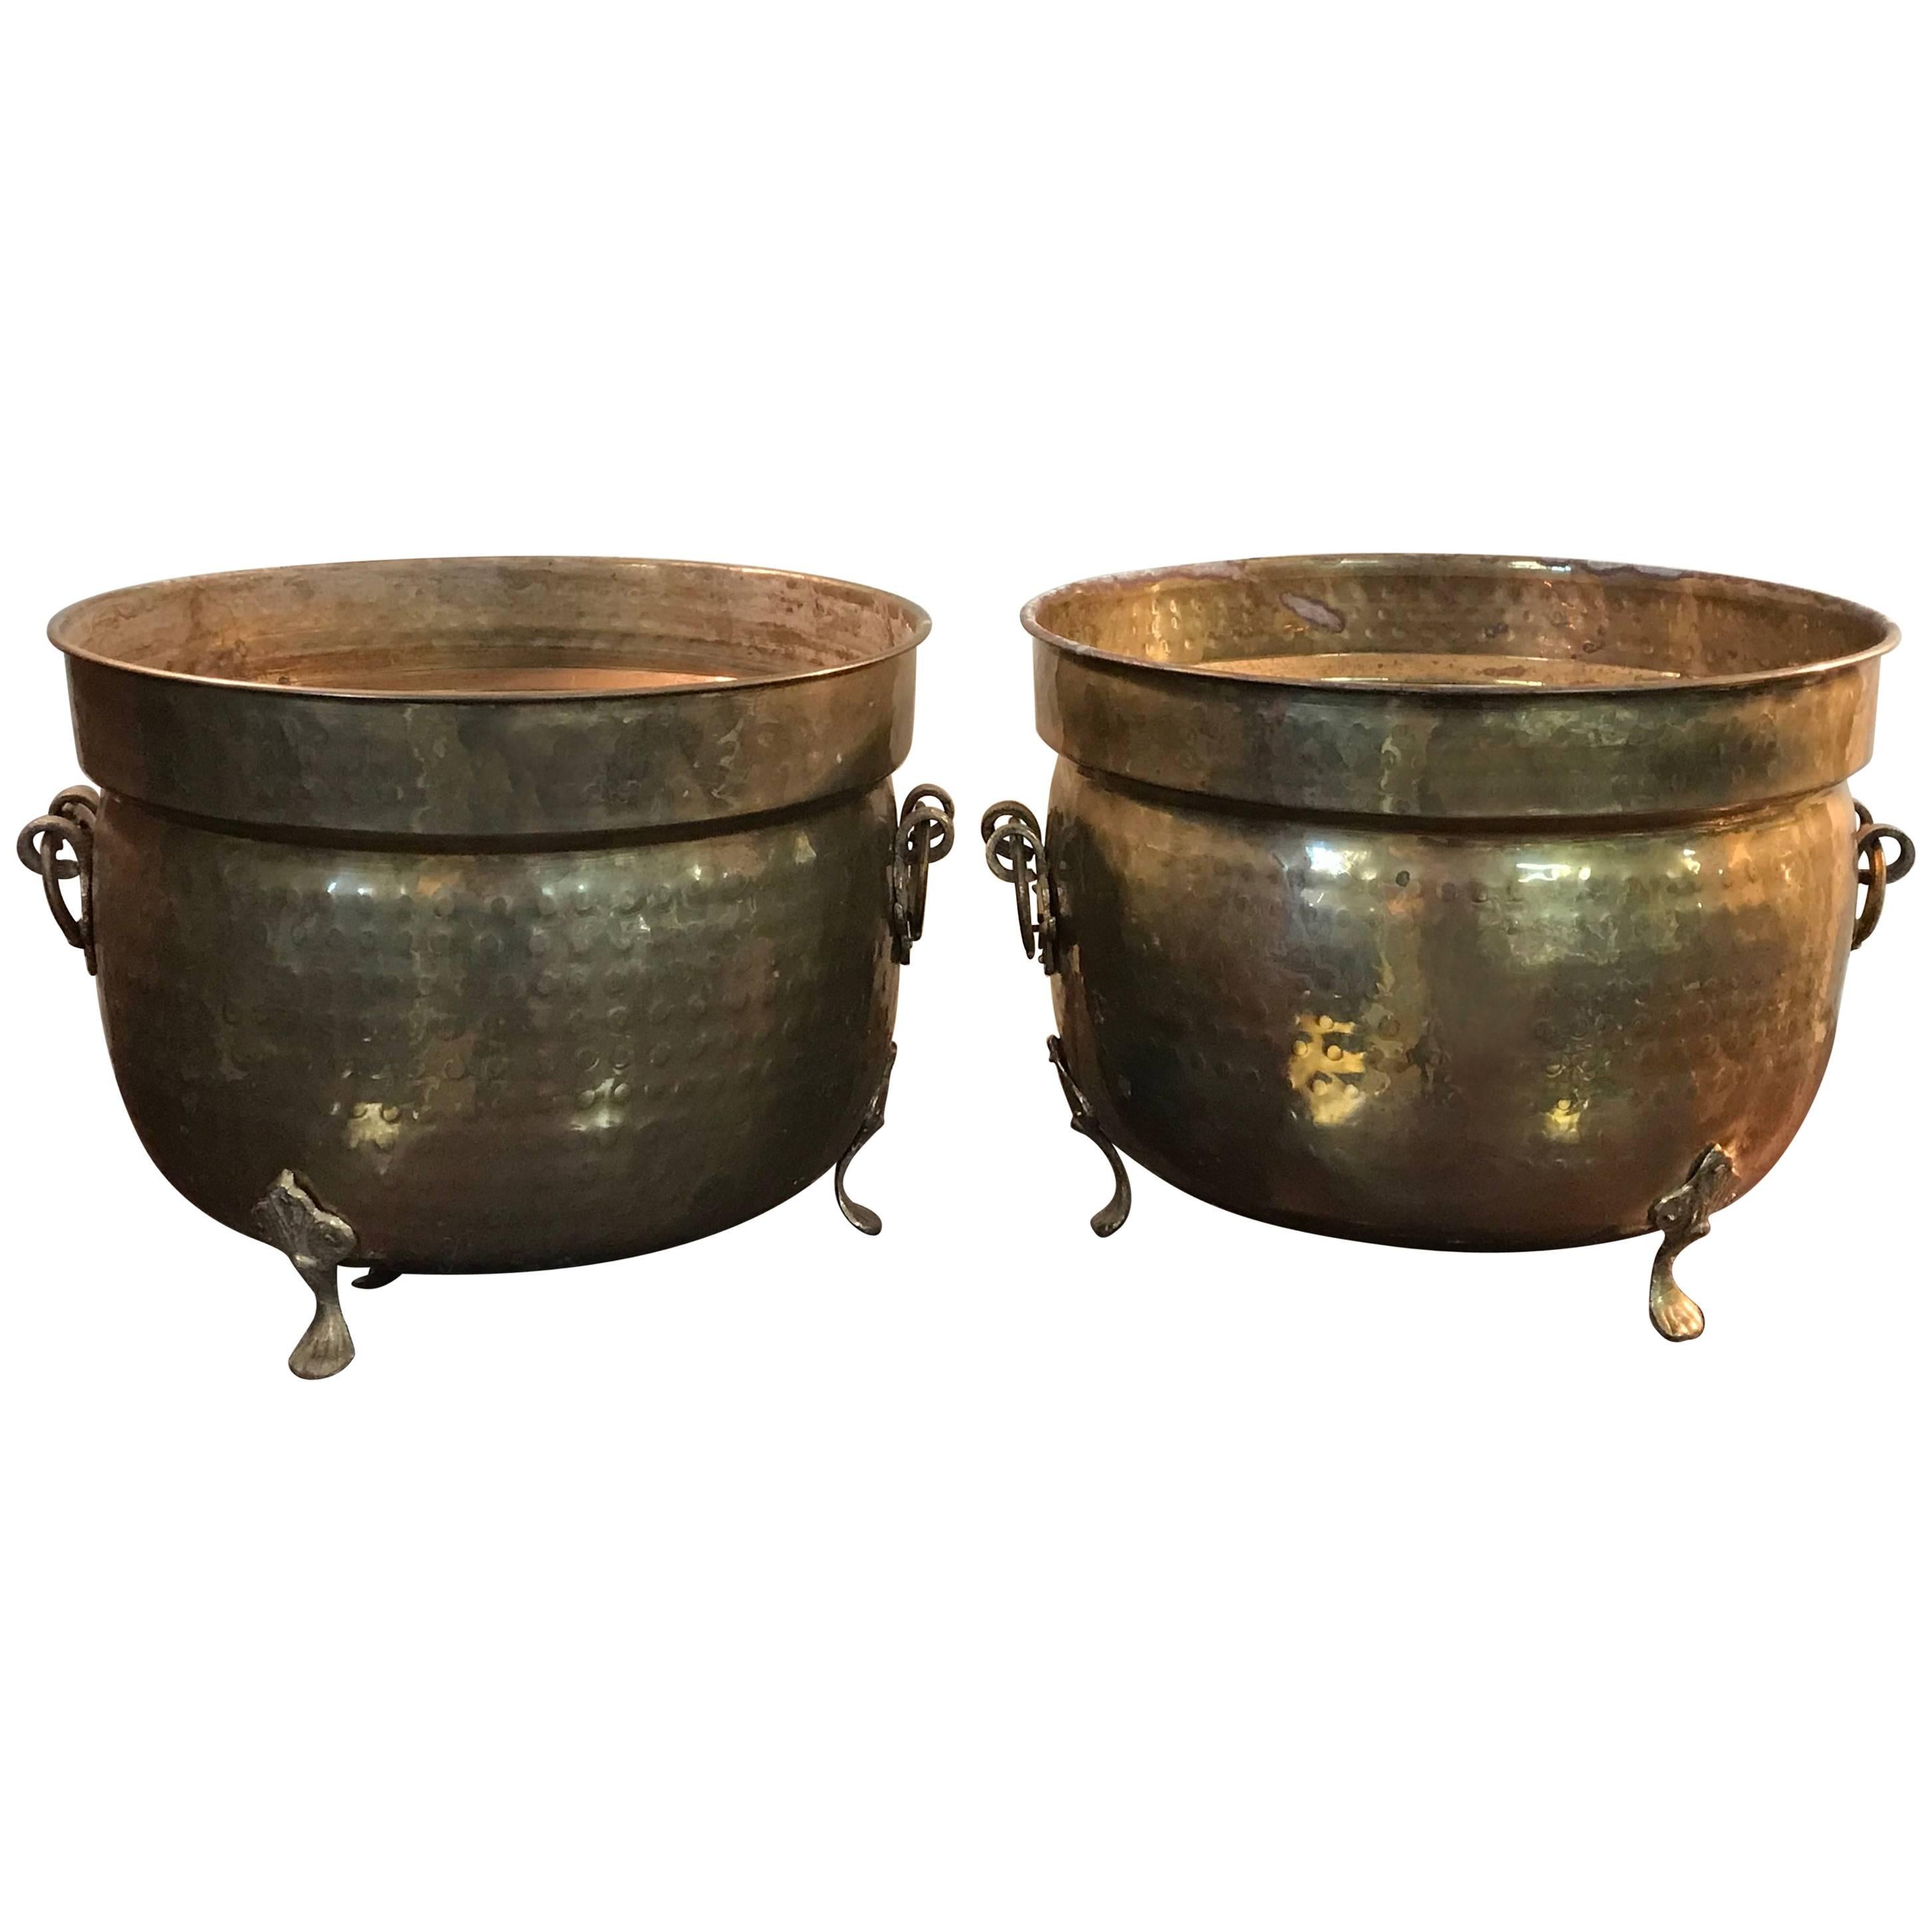 1960s Large Italian Brass Cachepot Planters with Clawfeet, Pair